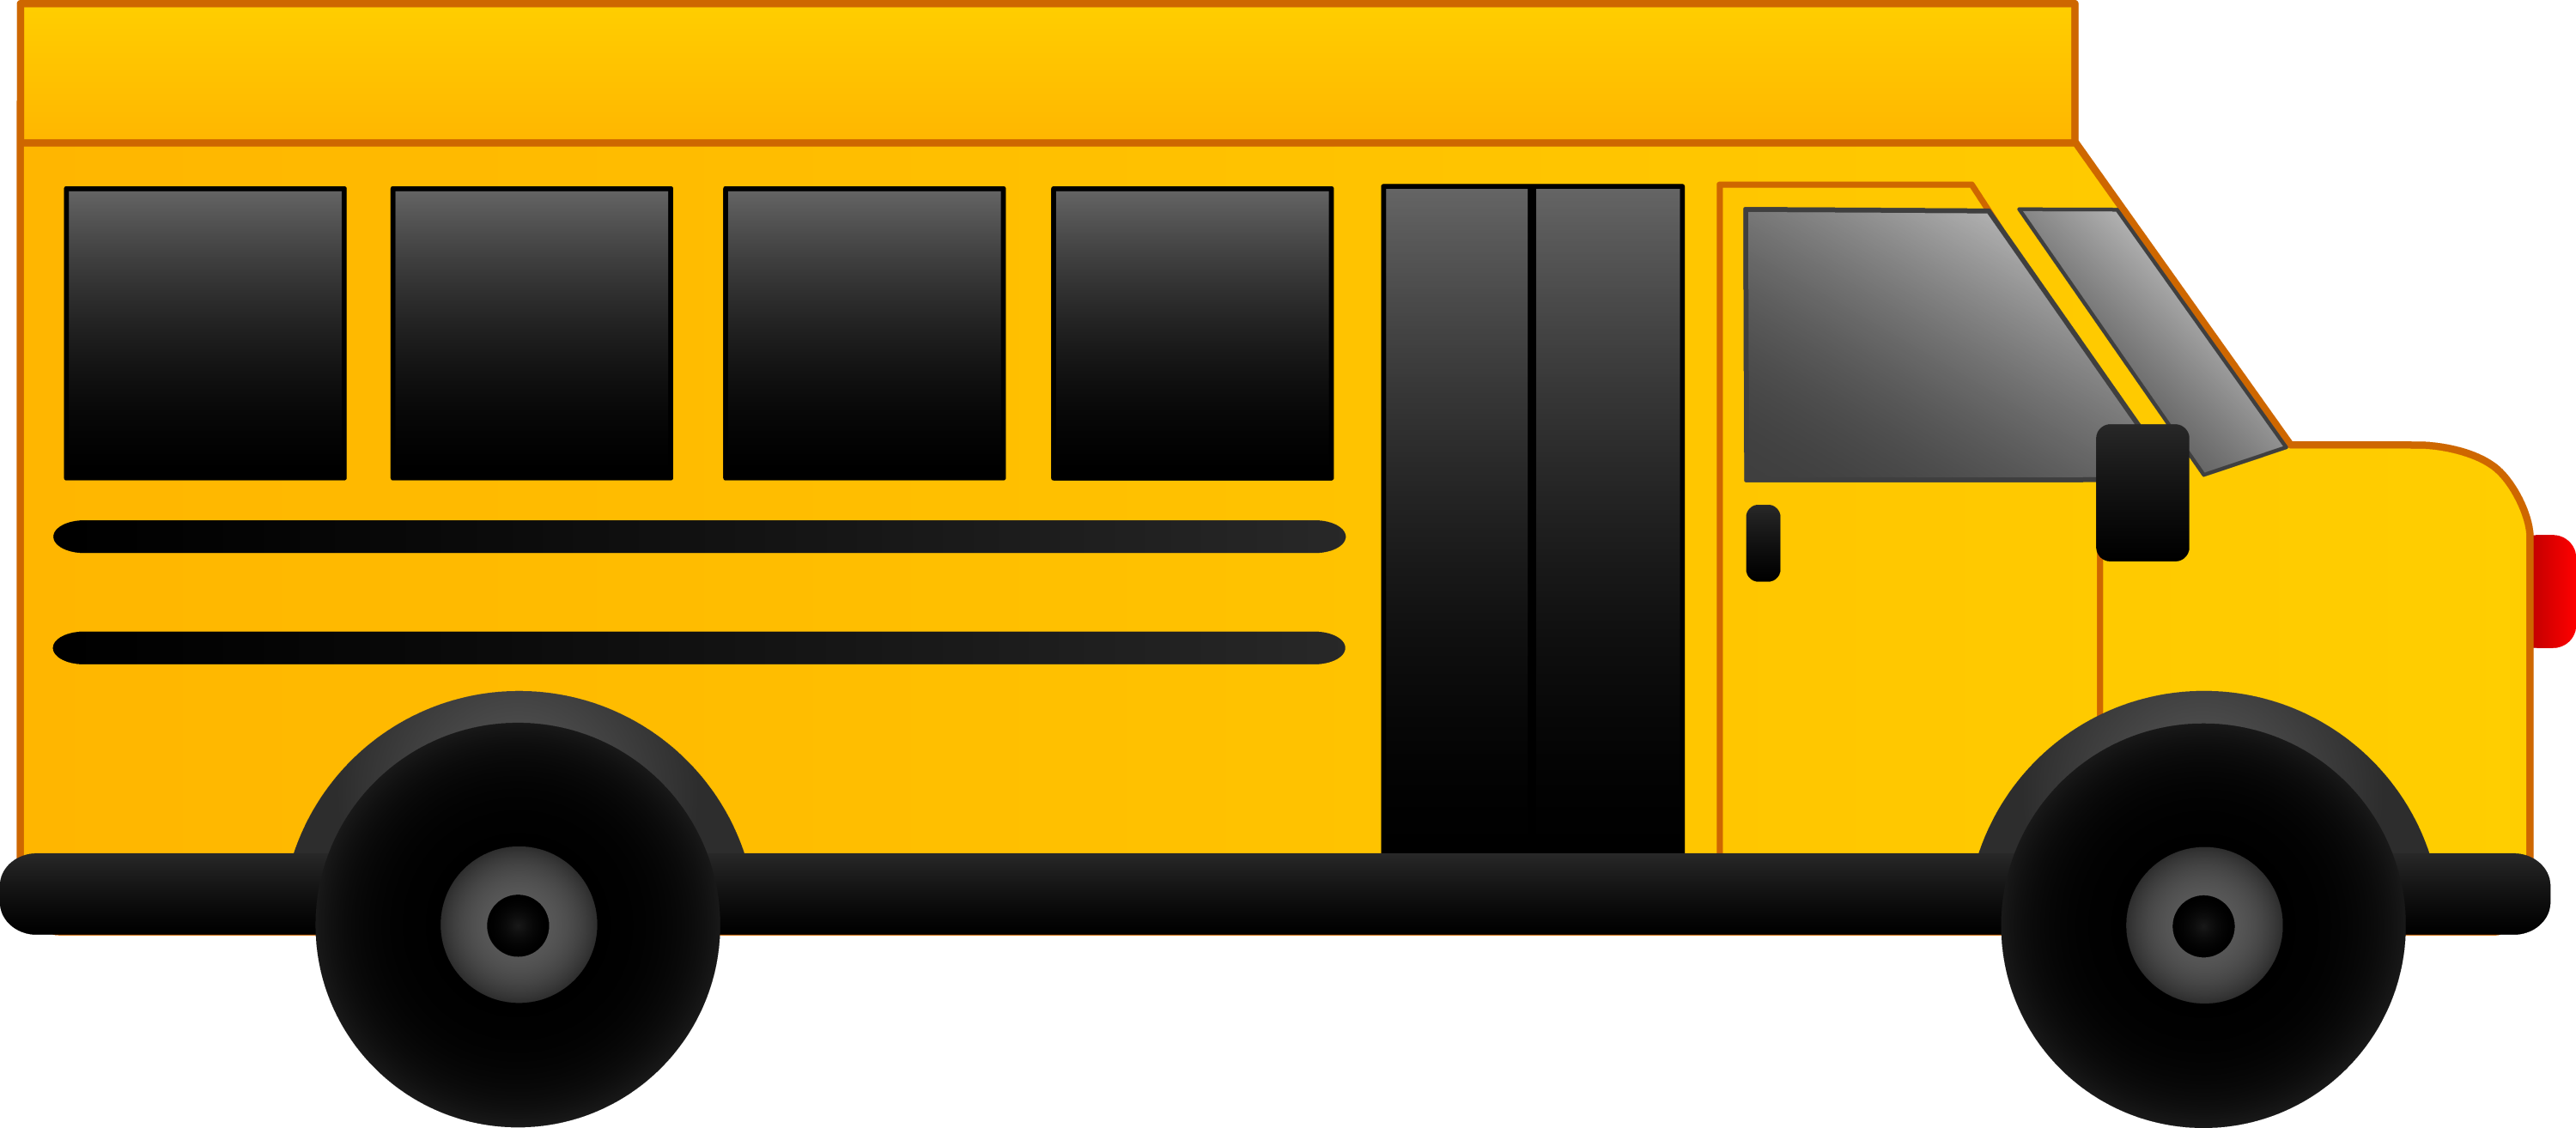 free clipart of school bus - photo #28